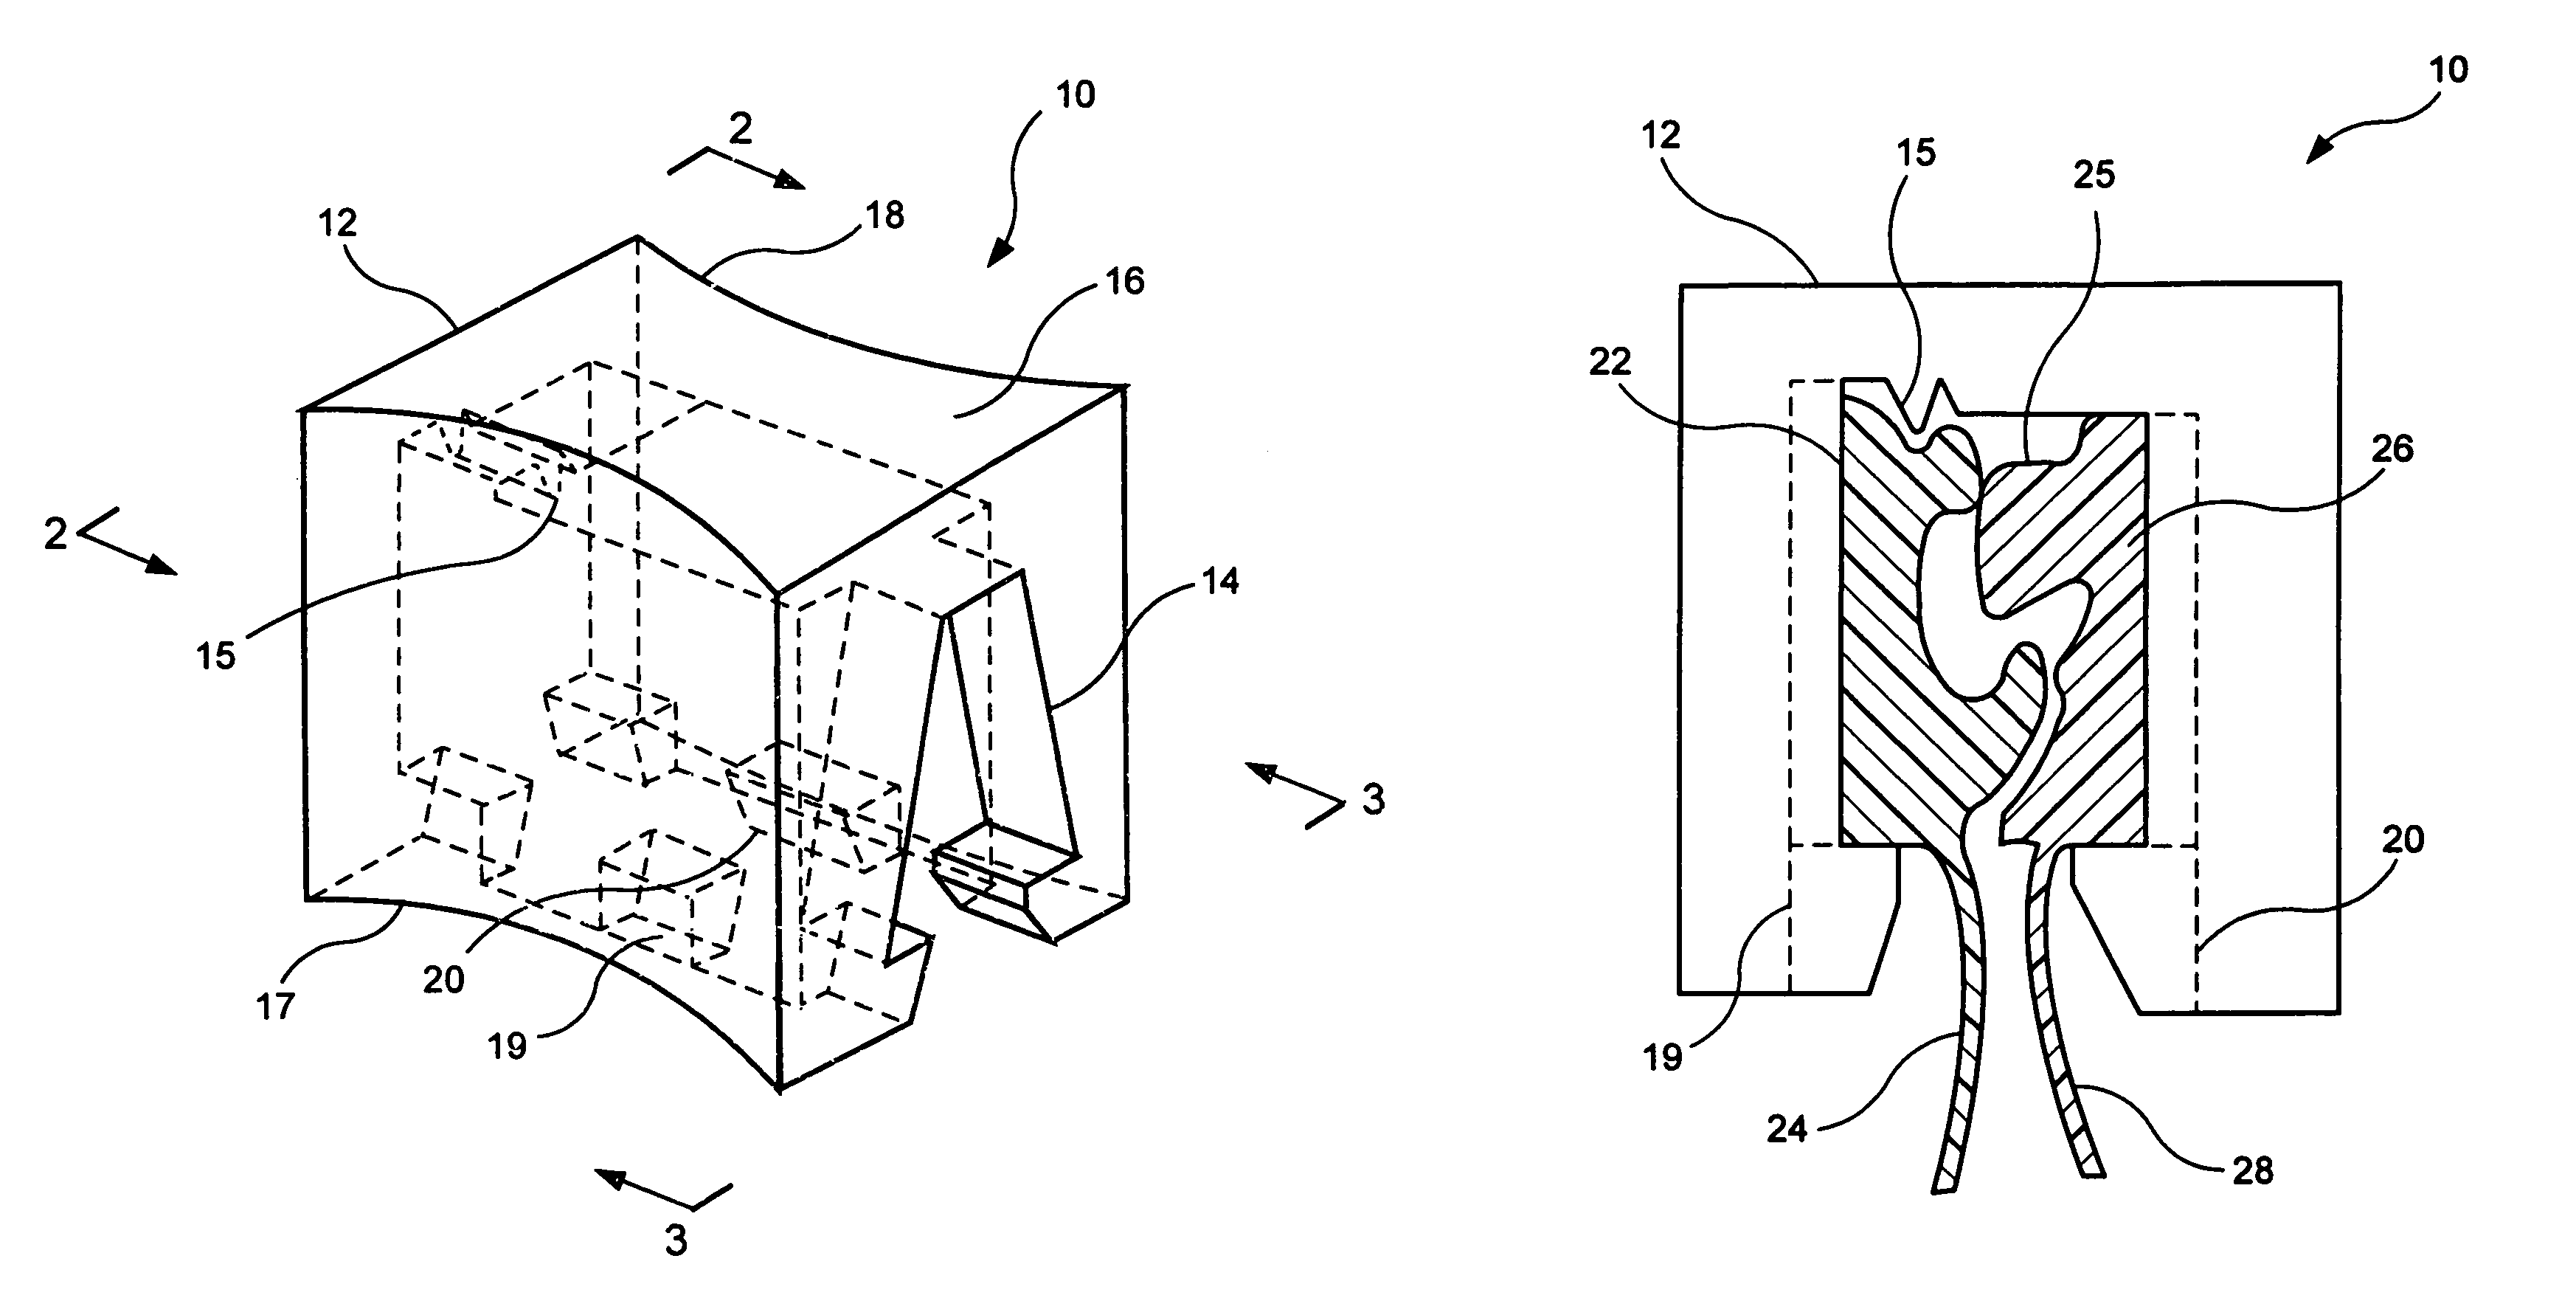 Insertion apparatus for attaching sliders onto zipper bags and film